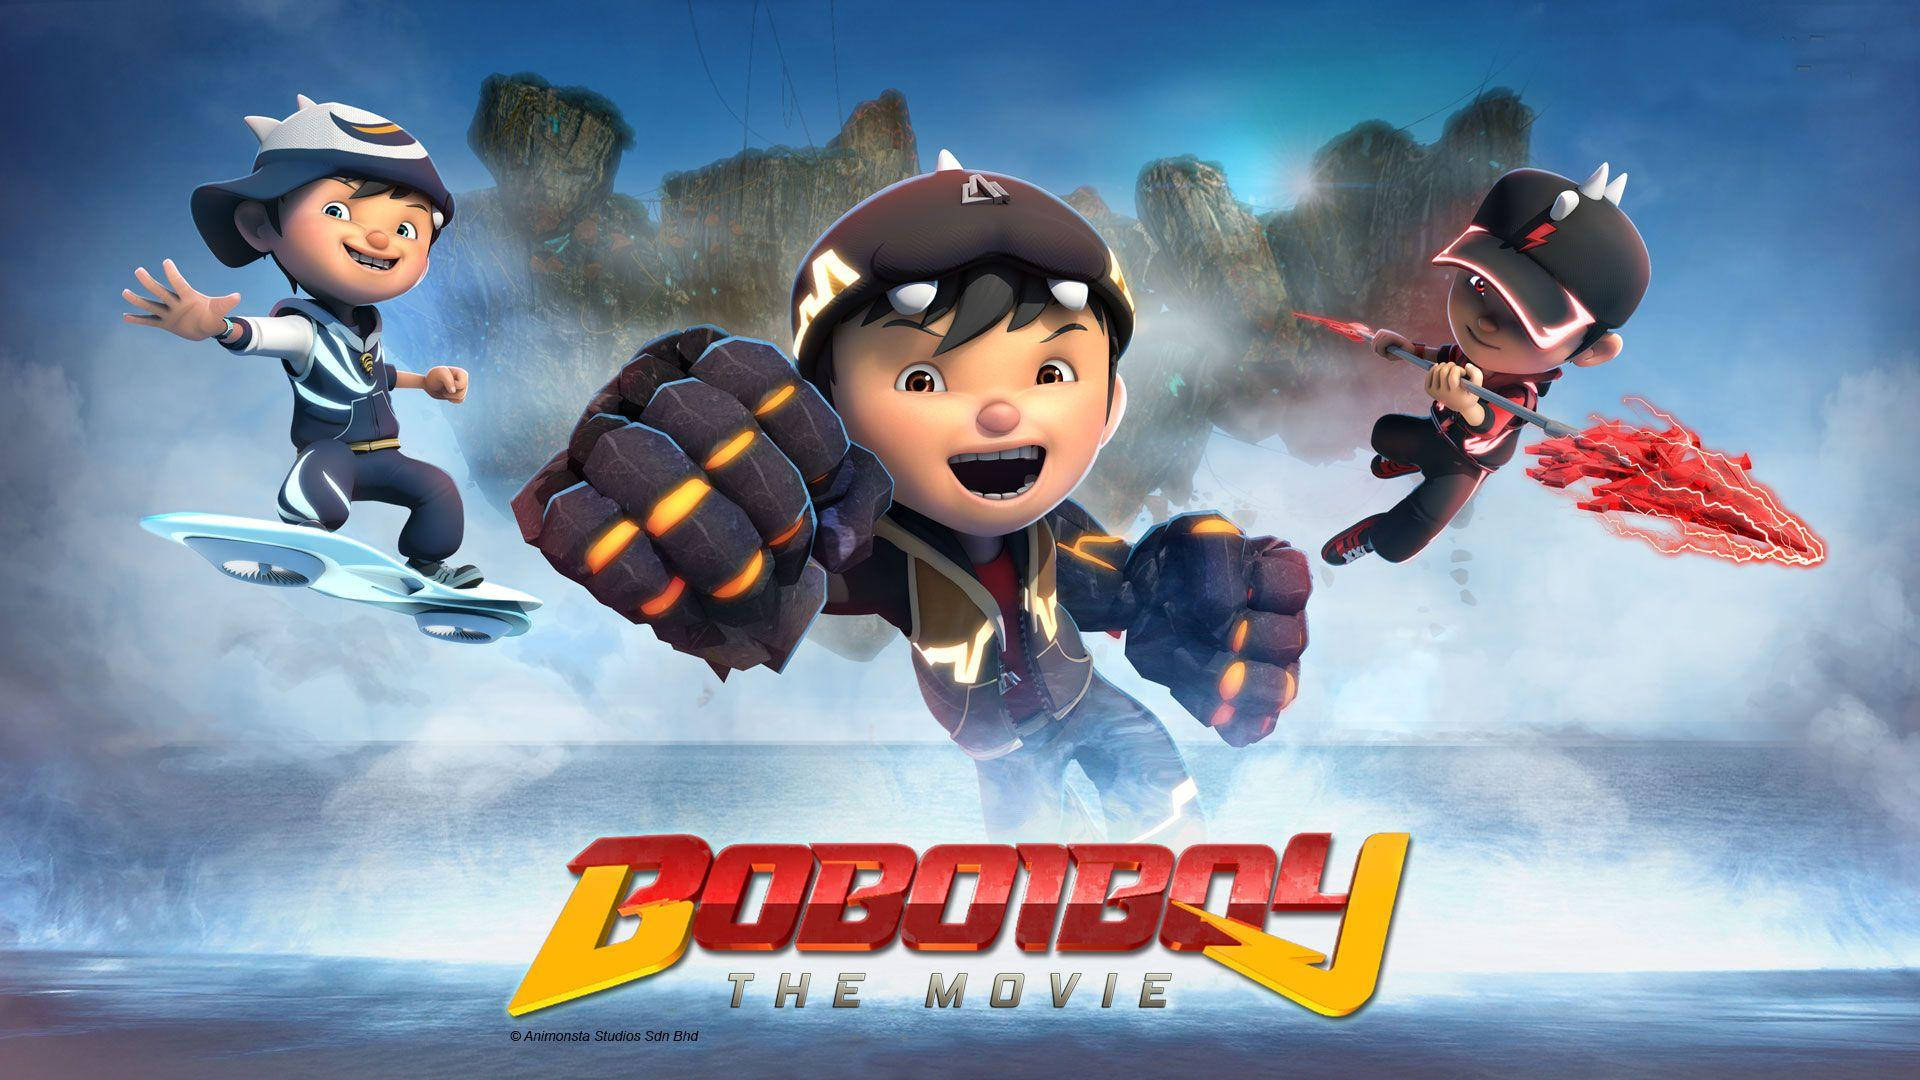 Exciting Action-packed Boboiboy Movie Poster. Wallpaper